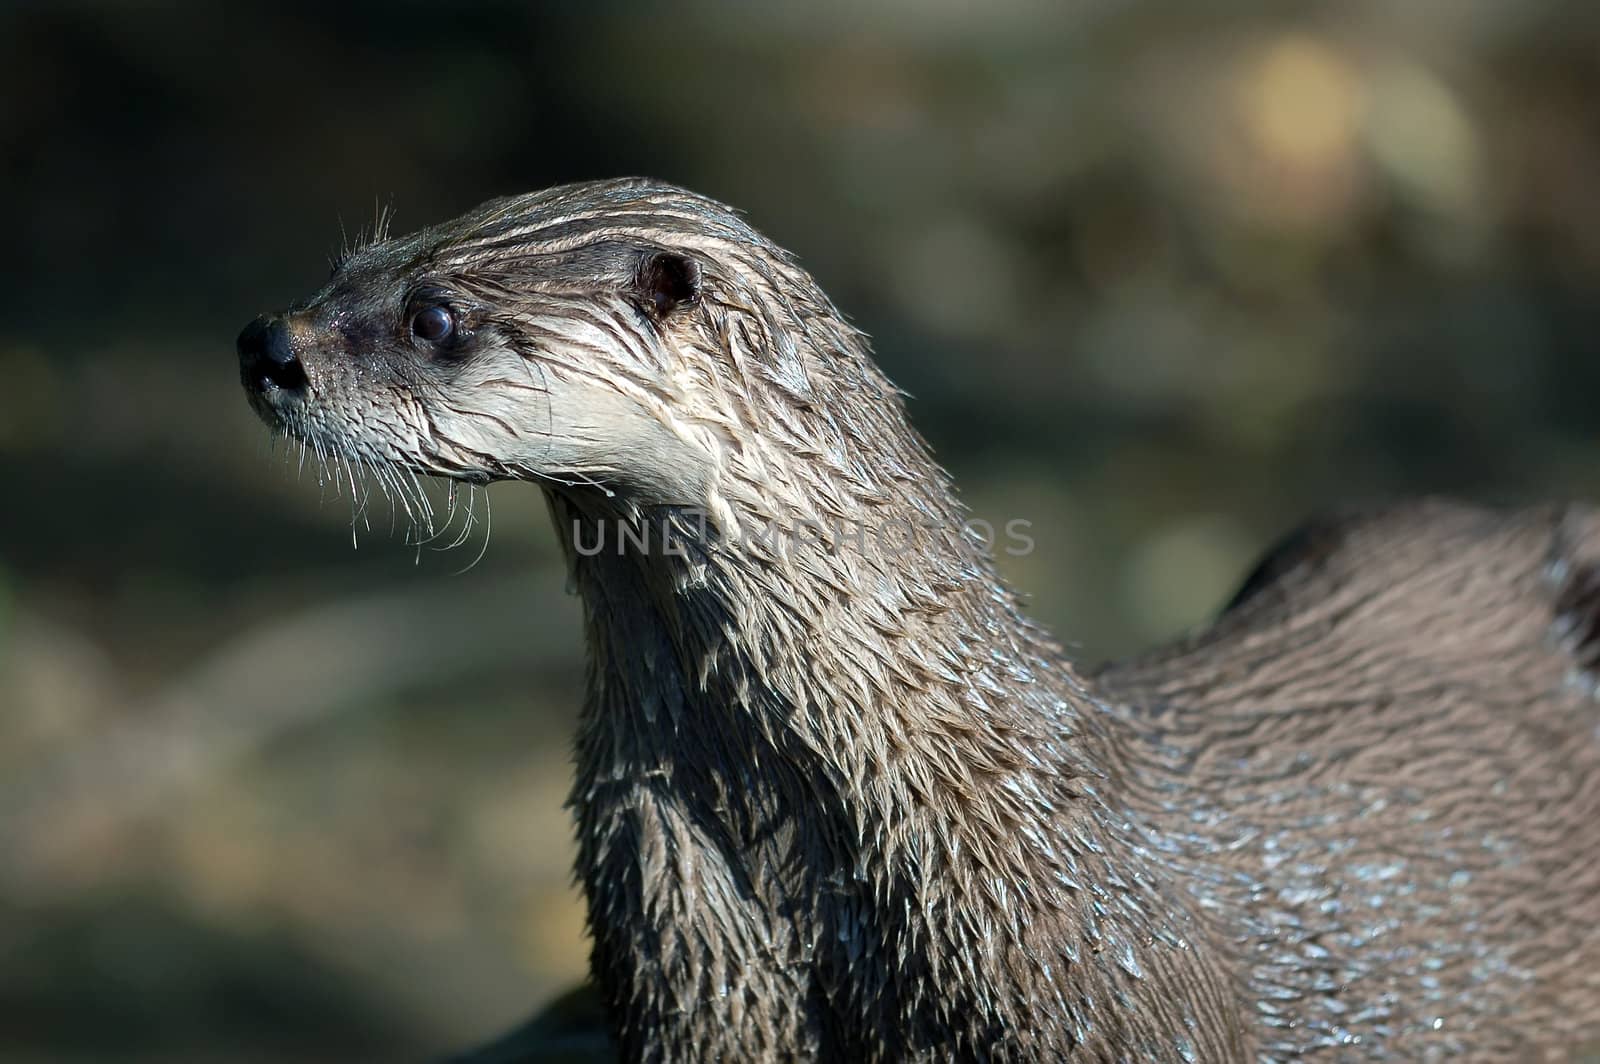 Northern River Otter (Lontra canadensis) by nialat